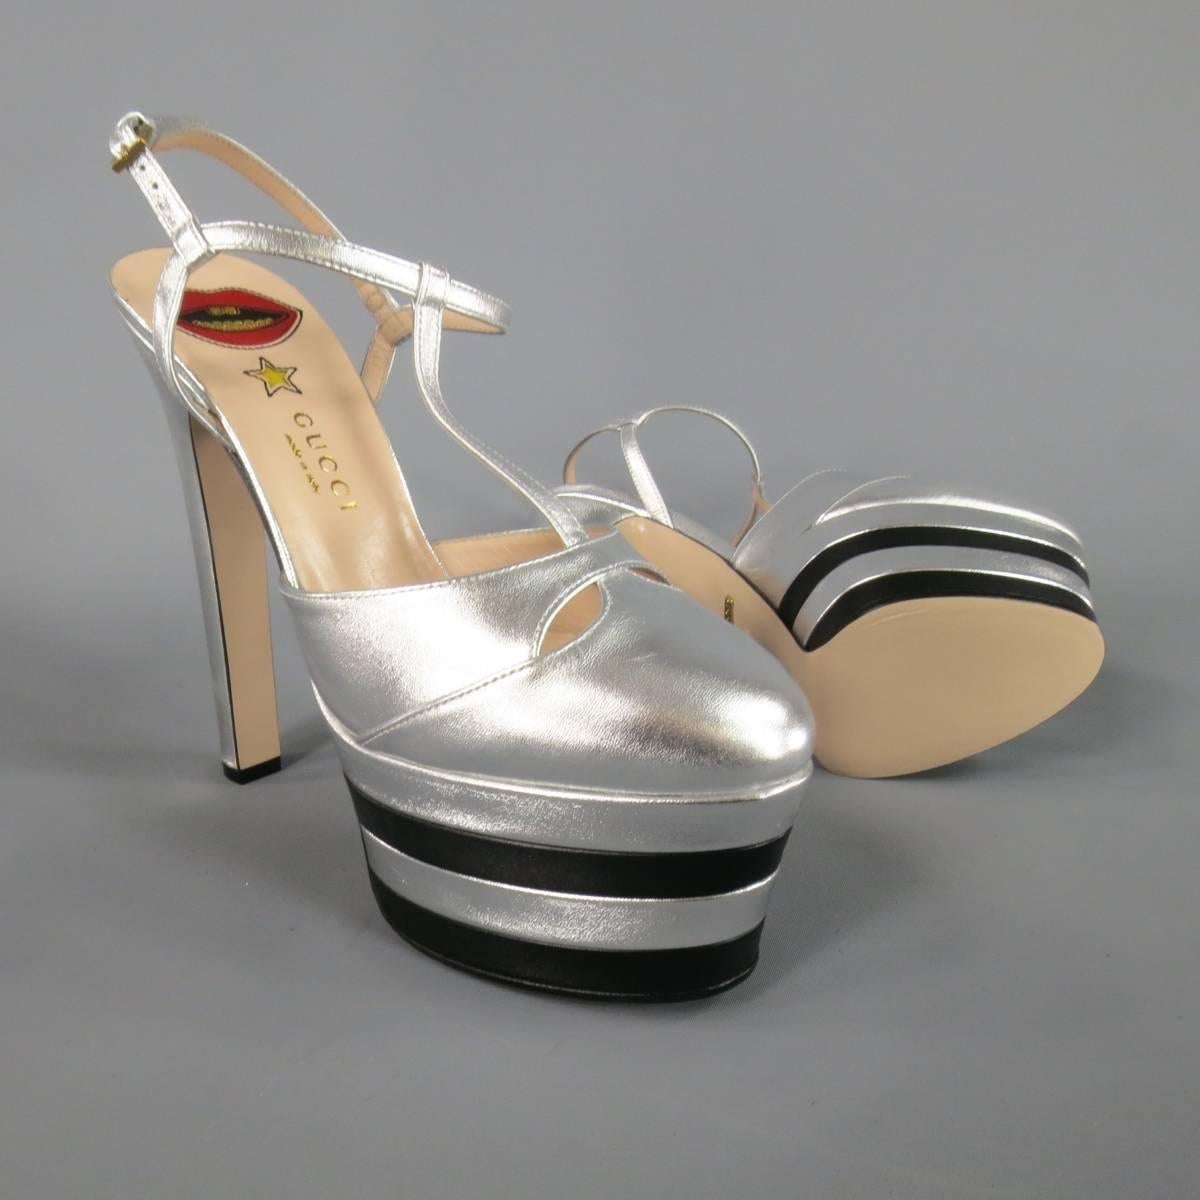 These fabulous GUCCI platforms come in light metallic silver leather and feature a rounded point toe with cutouts, T strap ankle harness, covered thick stiletto heel, and striped platform. Made in Italy.
 
Brand New Condition.
Marked: IT 38.5
